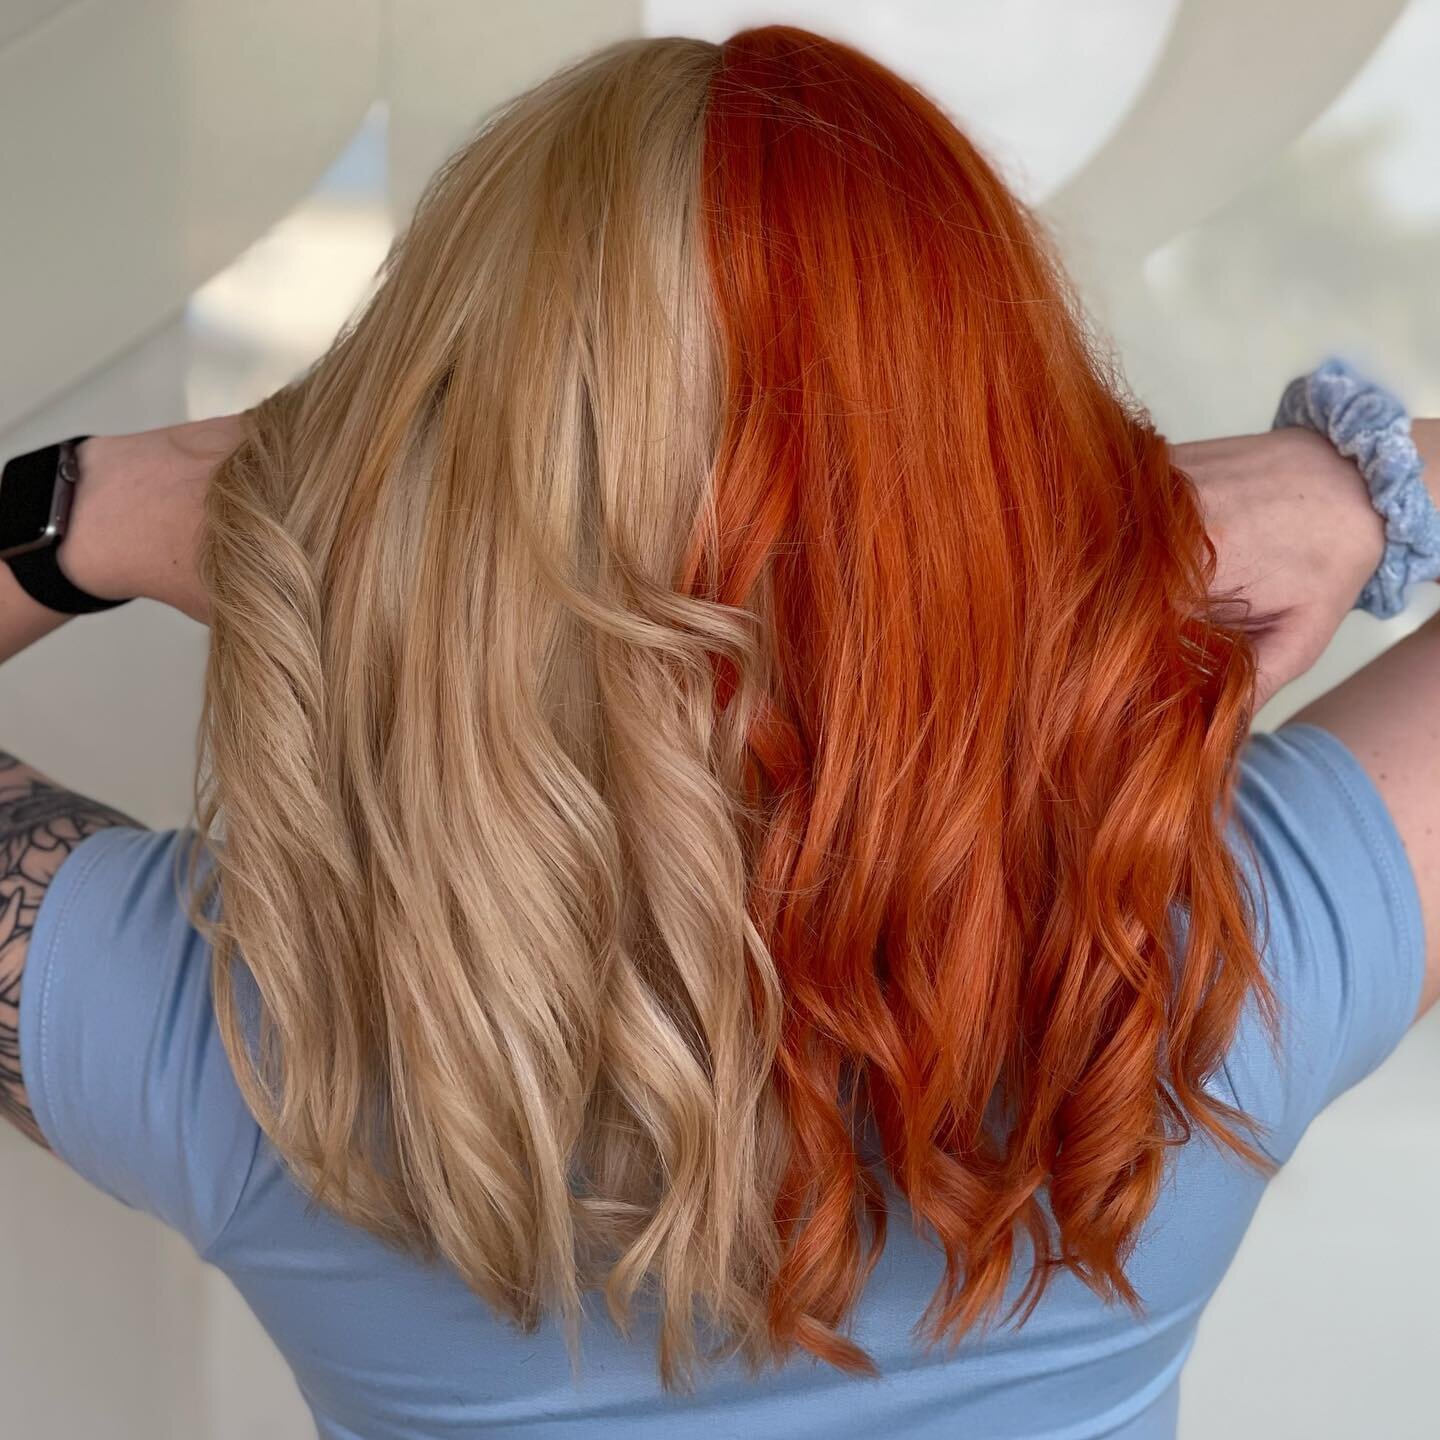 Artist - Francesca @boxdyebreakup 
Let&rsquo;s give this #splitdye two rounds of applause 
#👏👏 #😍#🧡

#copperhair #splitdyedhair #hair #hairstyles #haircut #haircolor #hairstyle #hairideas #hairfashion #hairtransformation #hairpainting #hairtrends